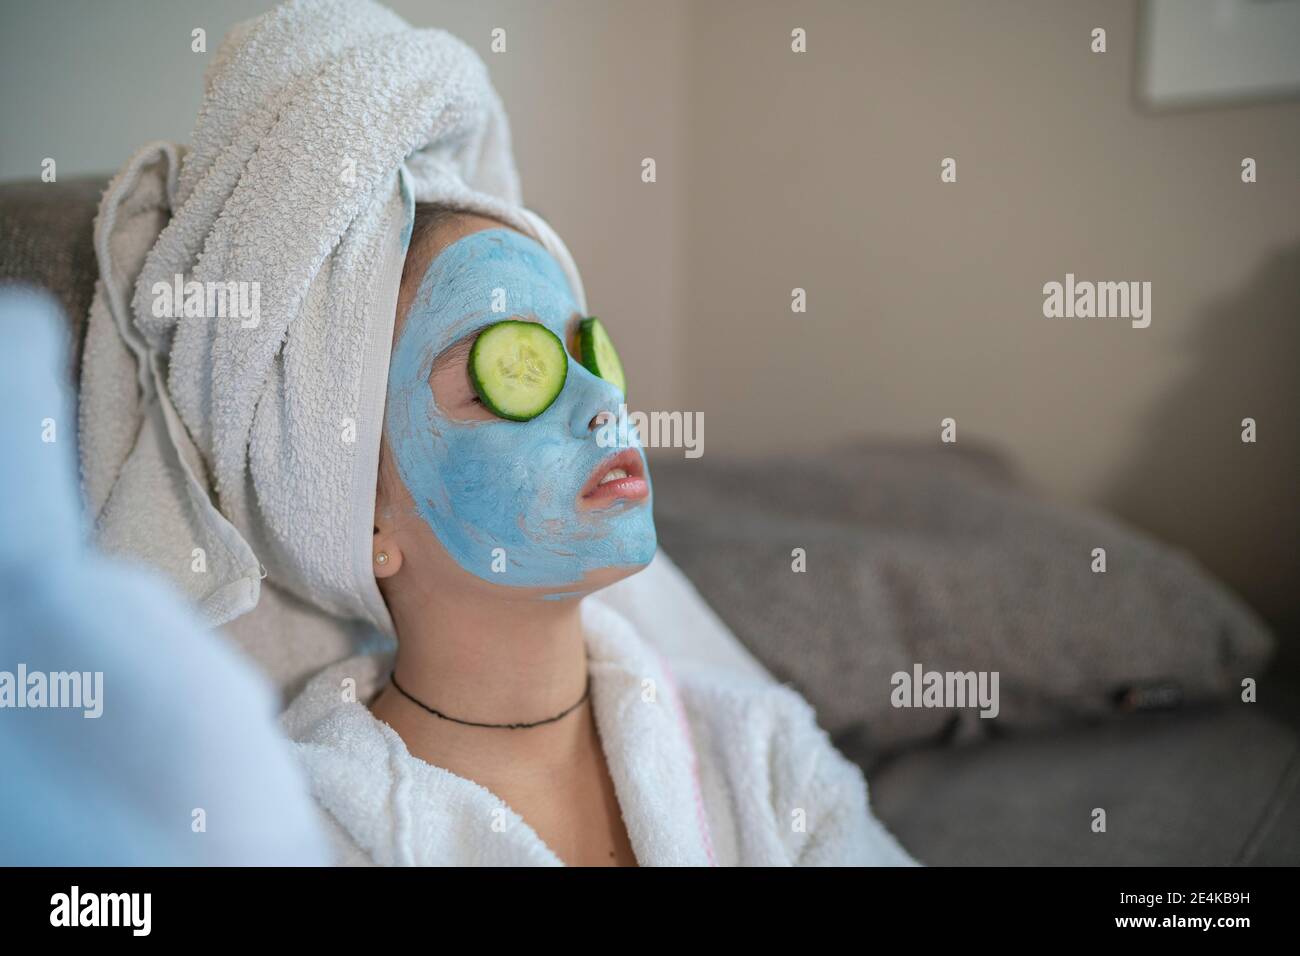 Girl with facial mask and cucumber slice on face Stock Photo